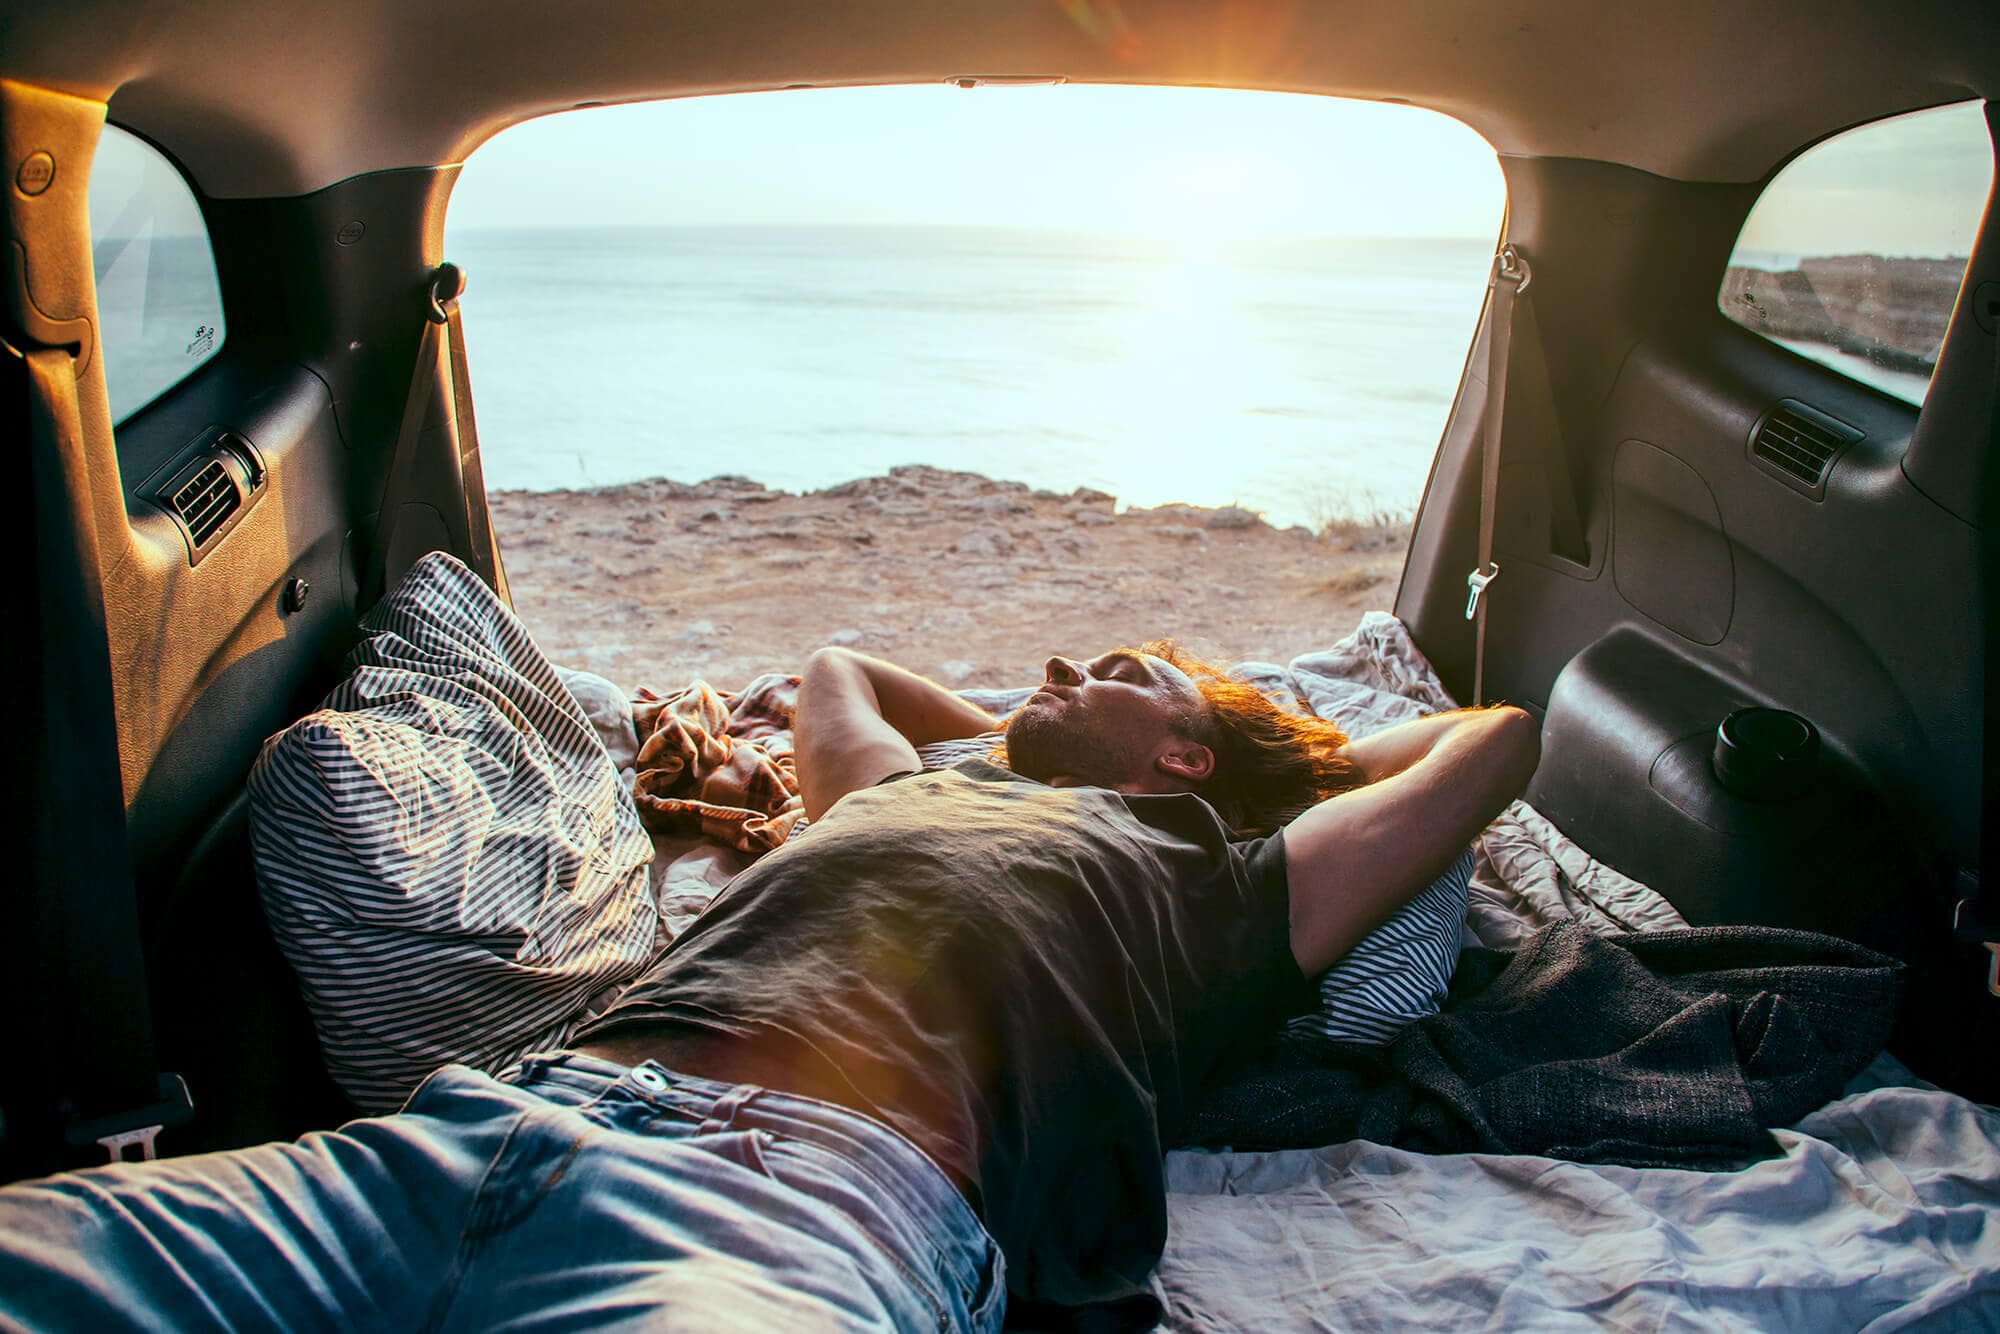 Can You Sleep in a Car with the Windows Closed?